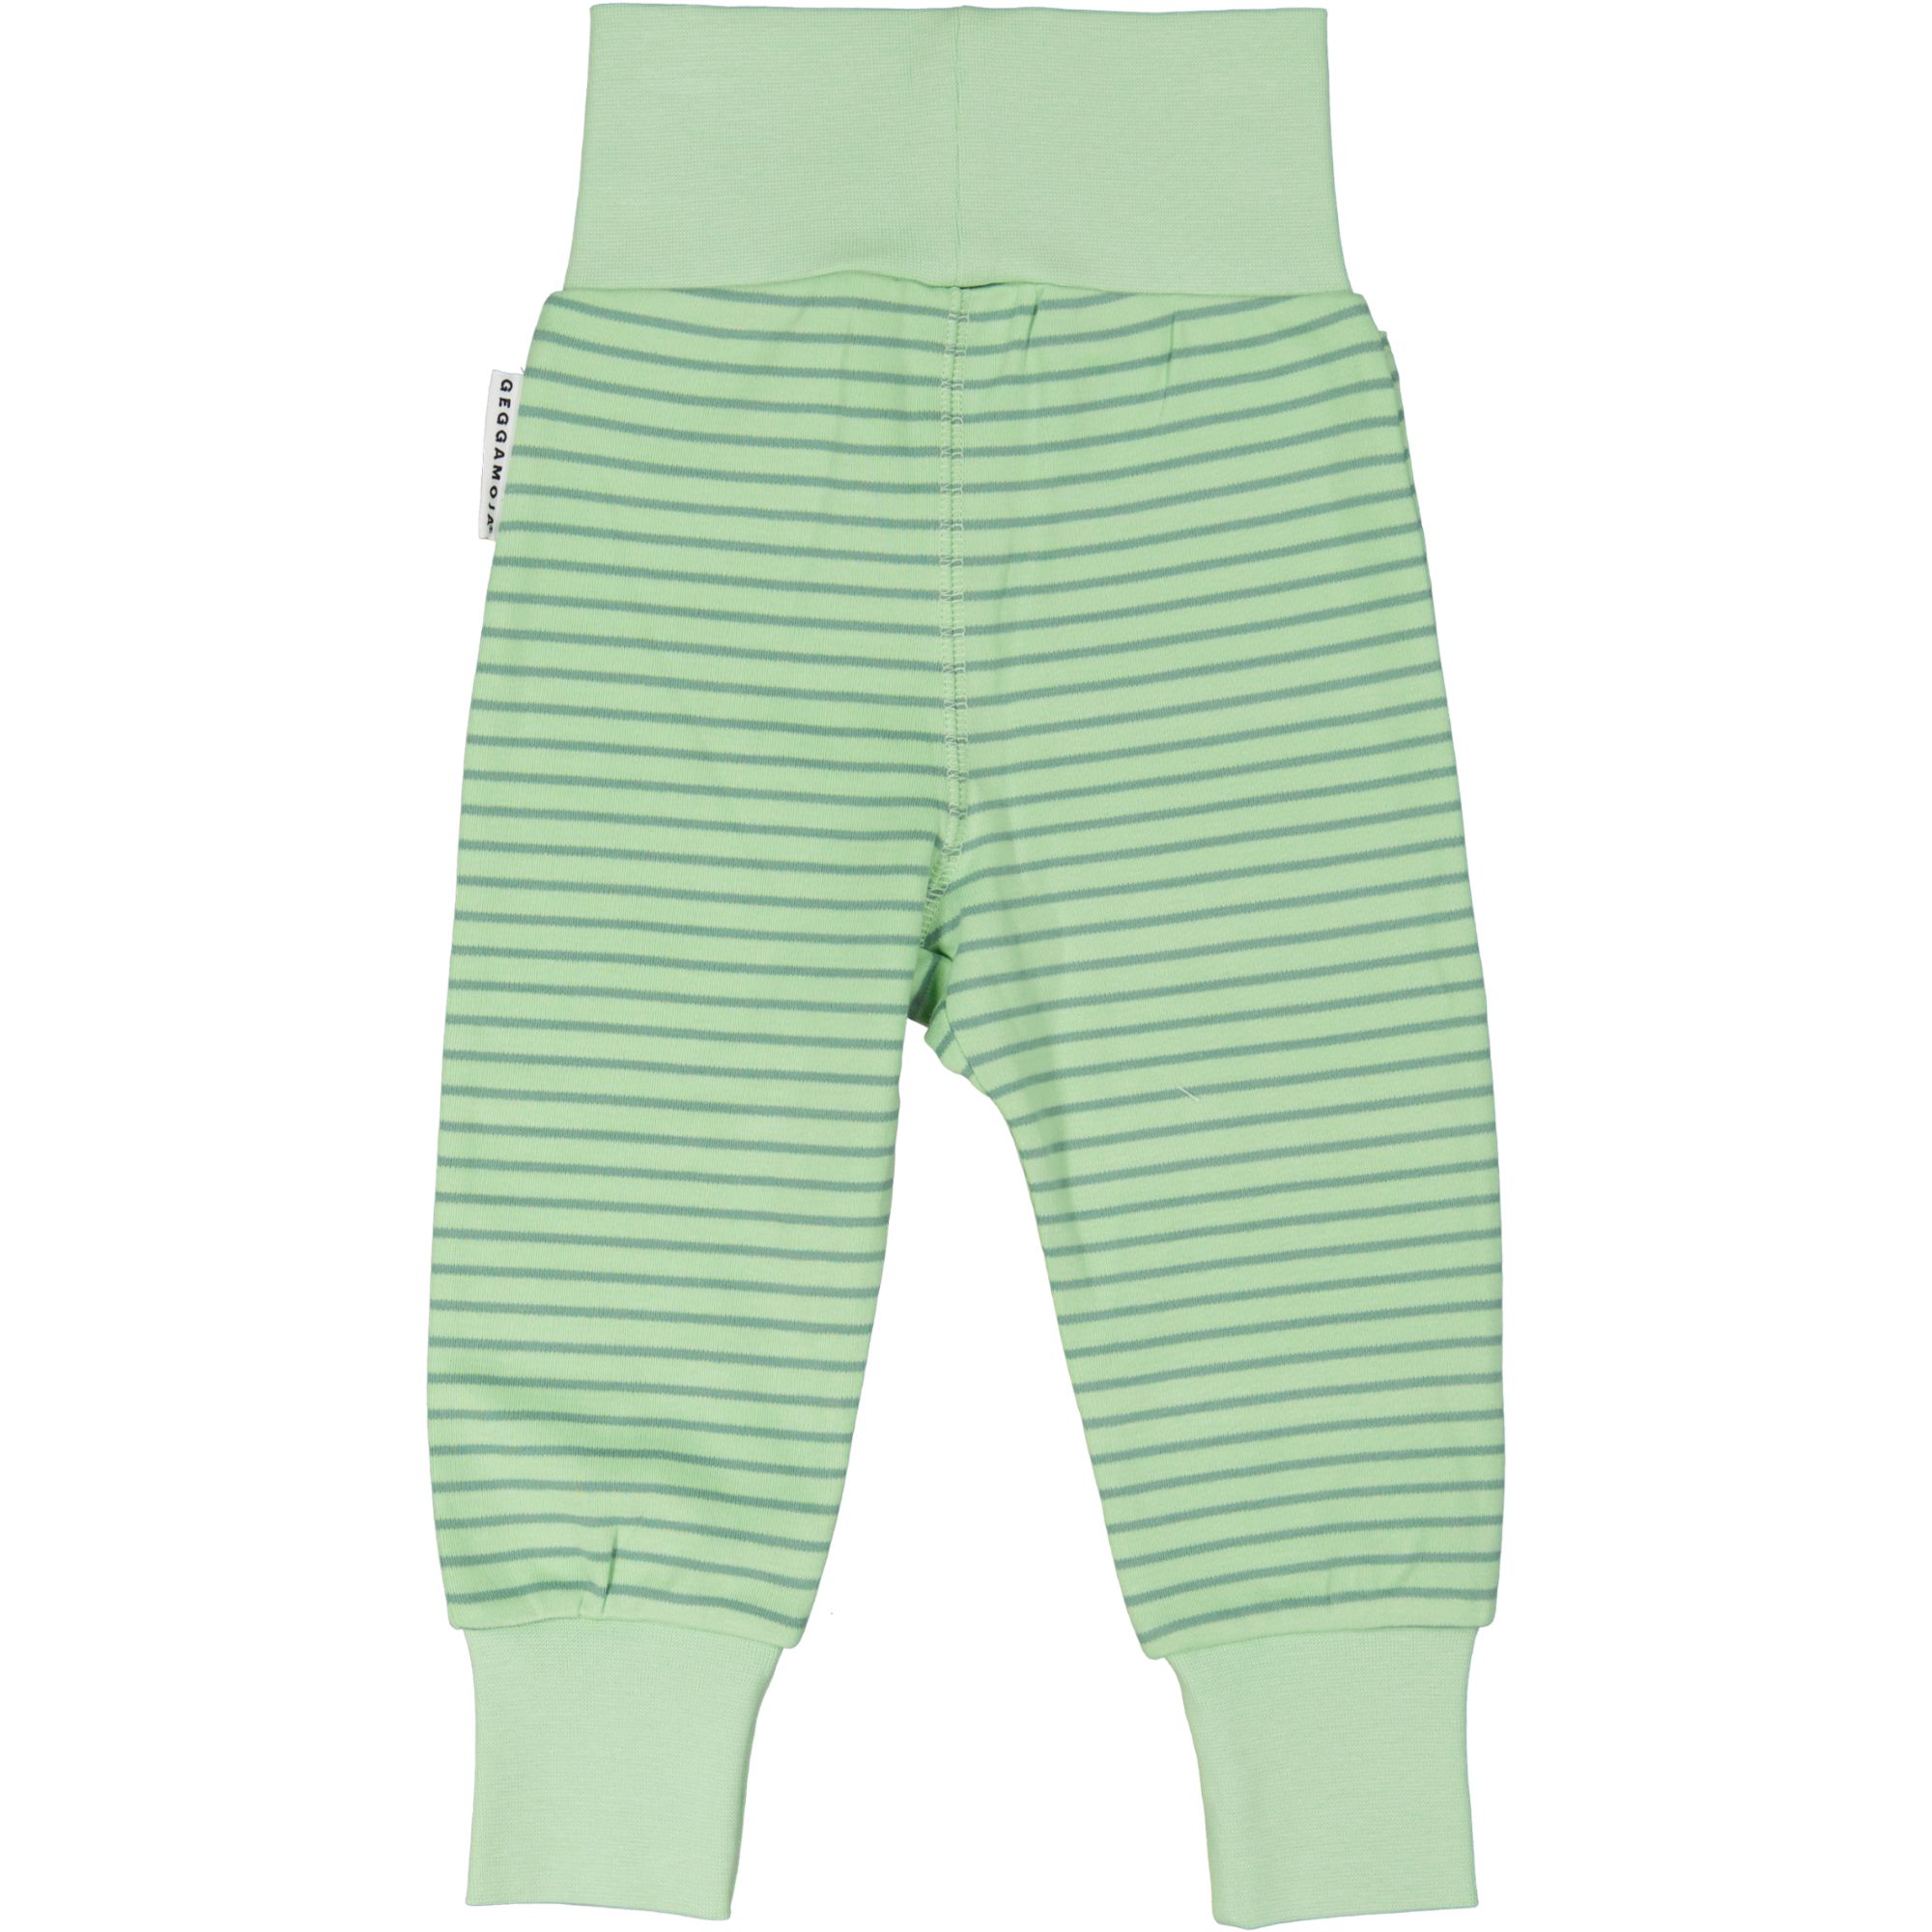 Baby trousers L.green/green 17